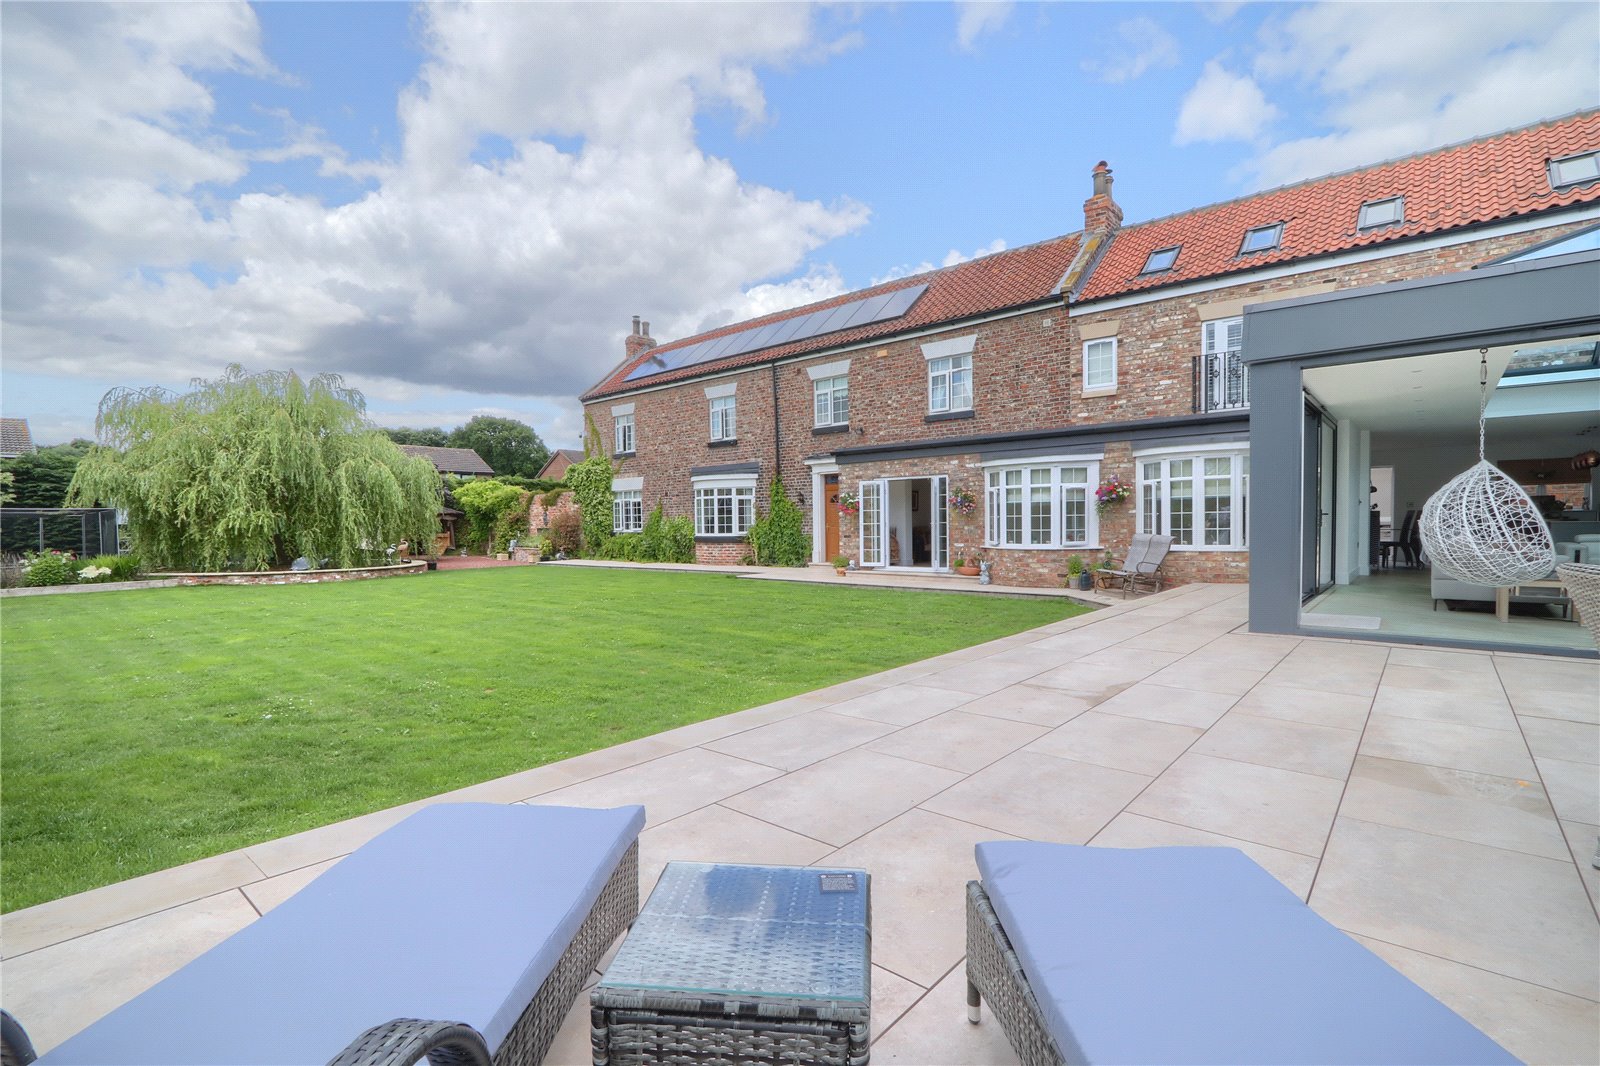 6 bed house for sale in Darlington Lane, Stockton-on-Tees  - Property Image 1